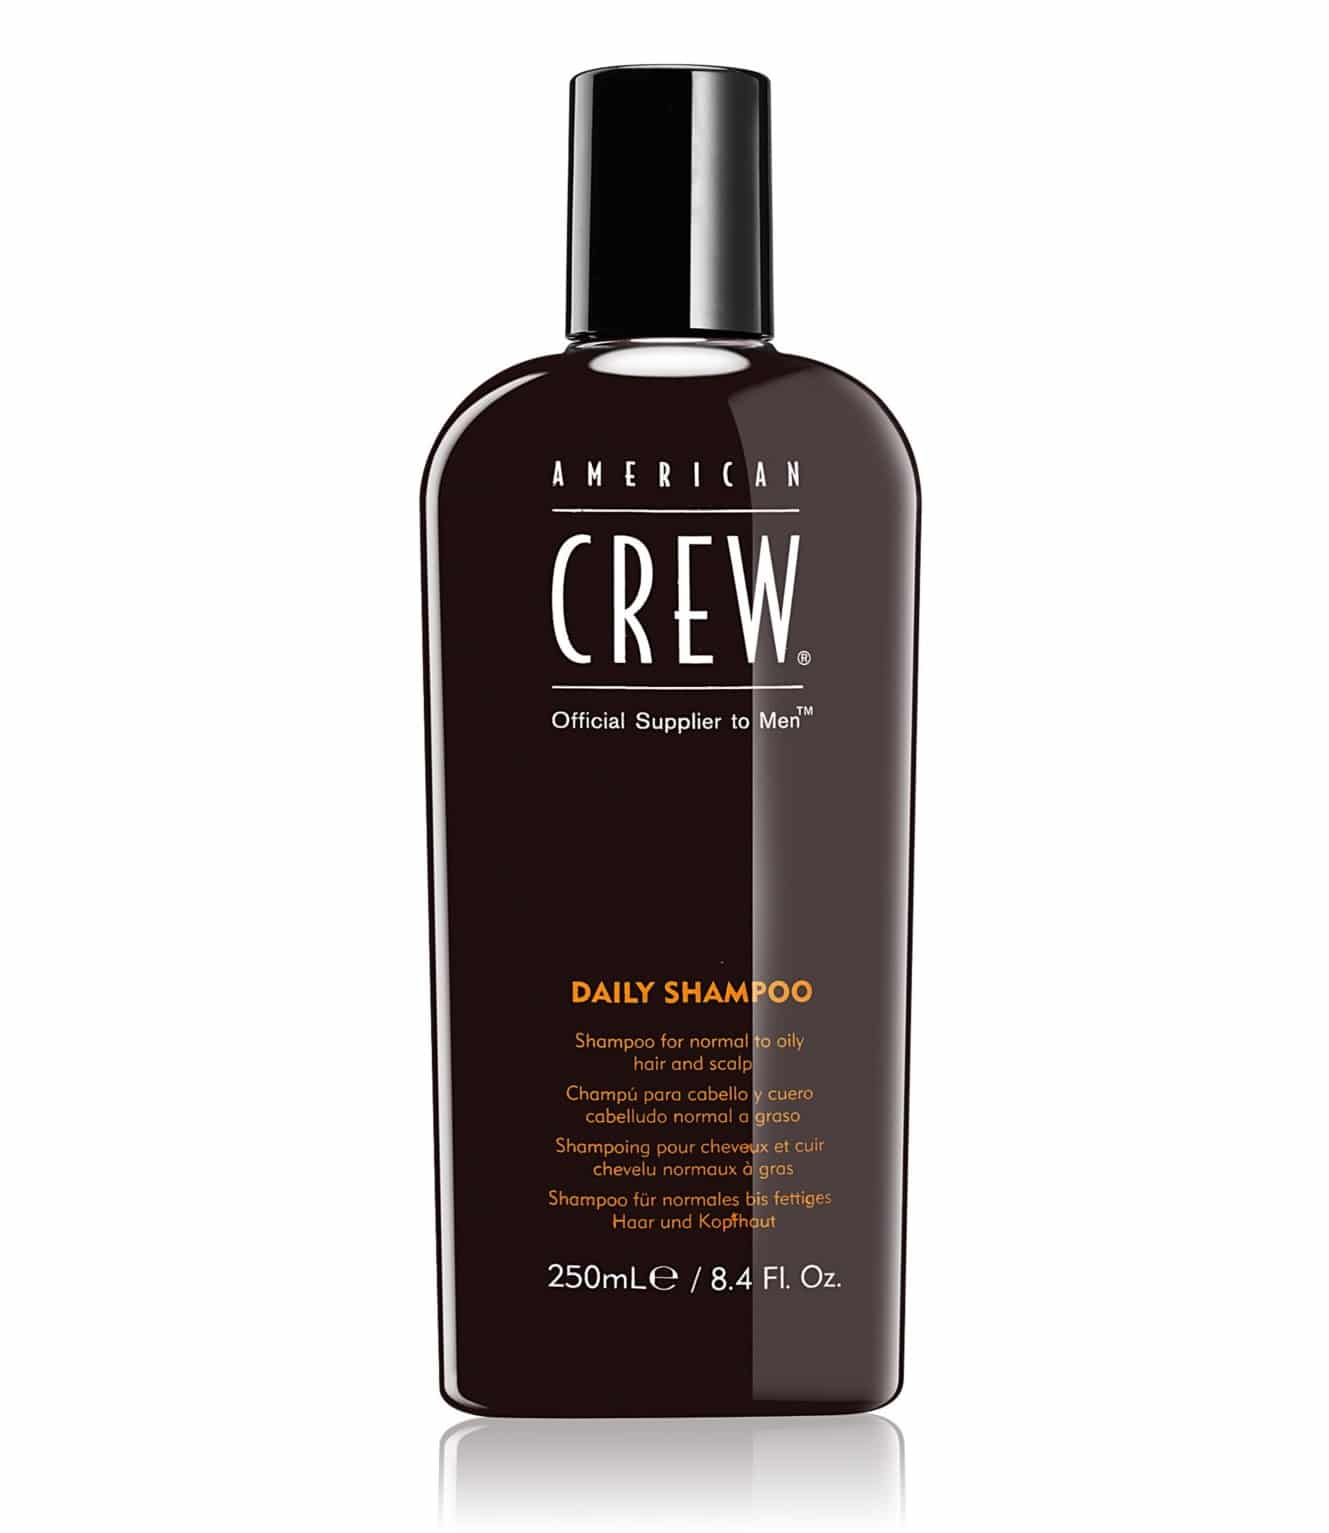 American Crew Shampoo for normal to oily hair